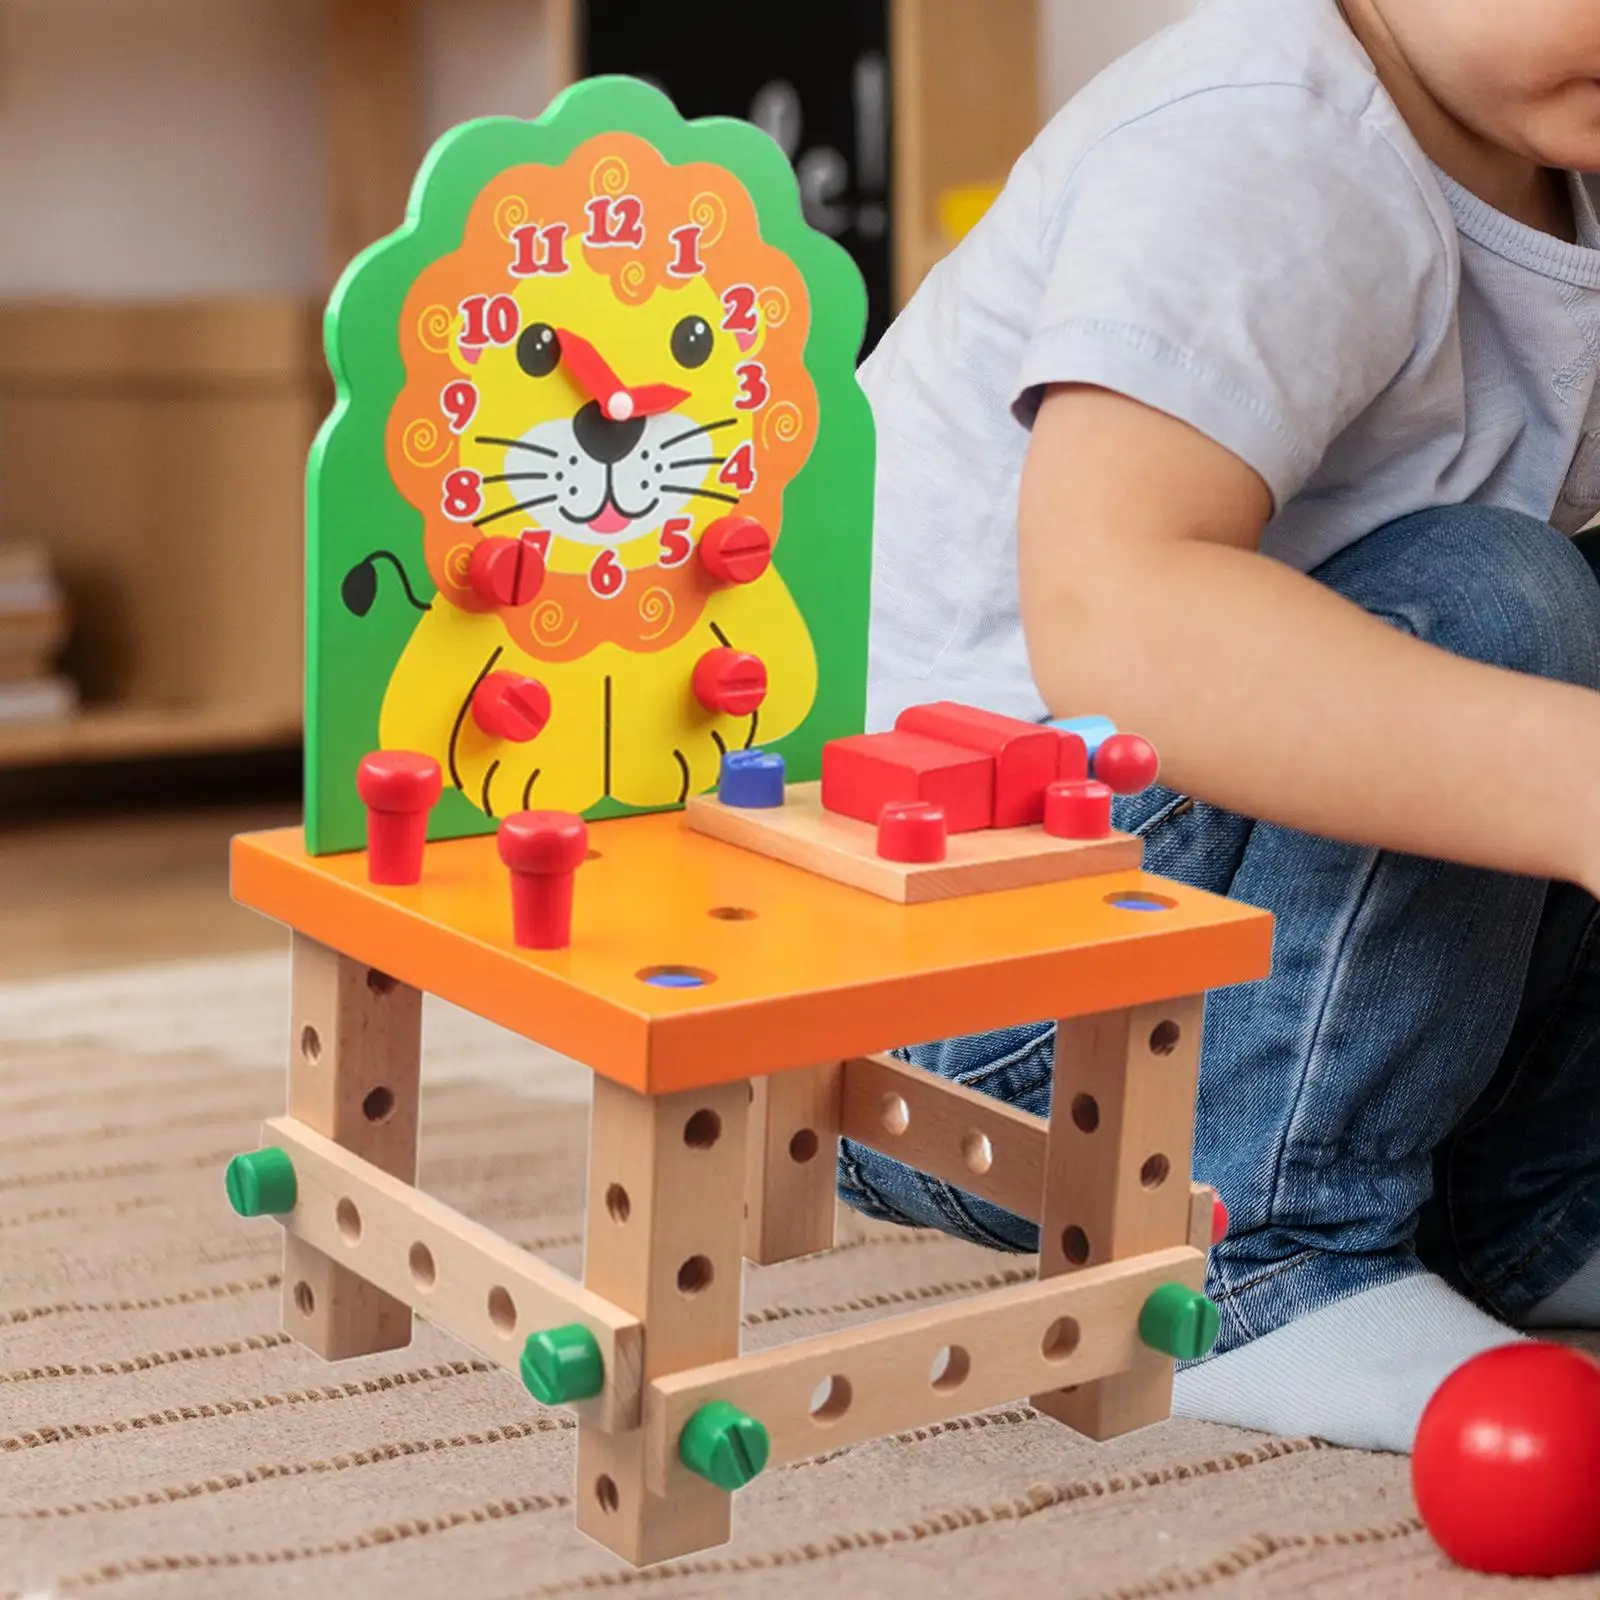 Wooden Assembling Chair Educational Building Toy Wooden Chair Models Construction Play Set for Toddler Children Girls Boys Gifts